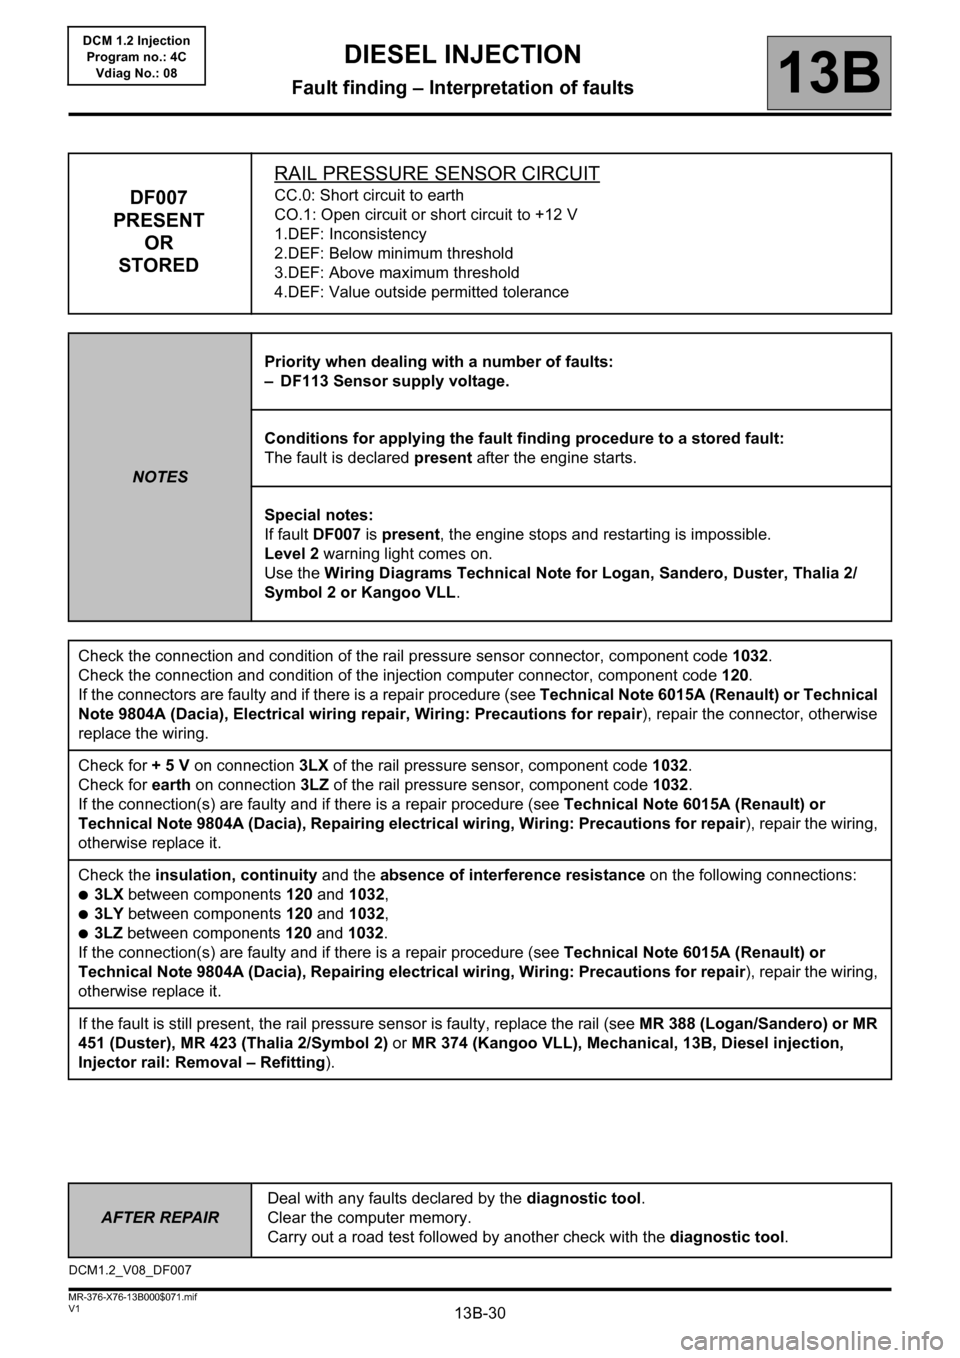 RENAULT KANGOO 2013 X61 / 2.G Diesel DCM 1.2 Injection Owners Manual 13B-30
AFTER REPAIRDeal with any faults declared by the diagnostic tool. 
Clear the computer memory.
Carry out a road test followed by another check with the diagnostic tool.
V1 MR-376-X76-13B000$071.